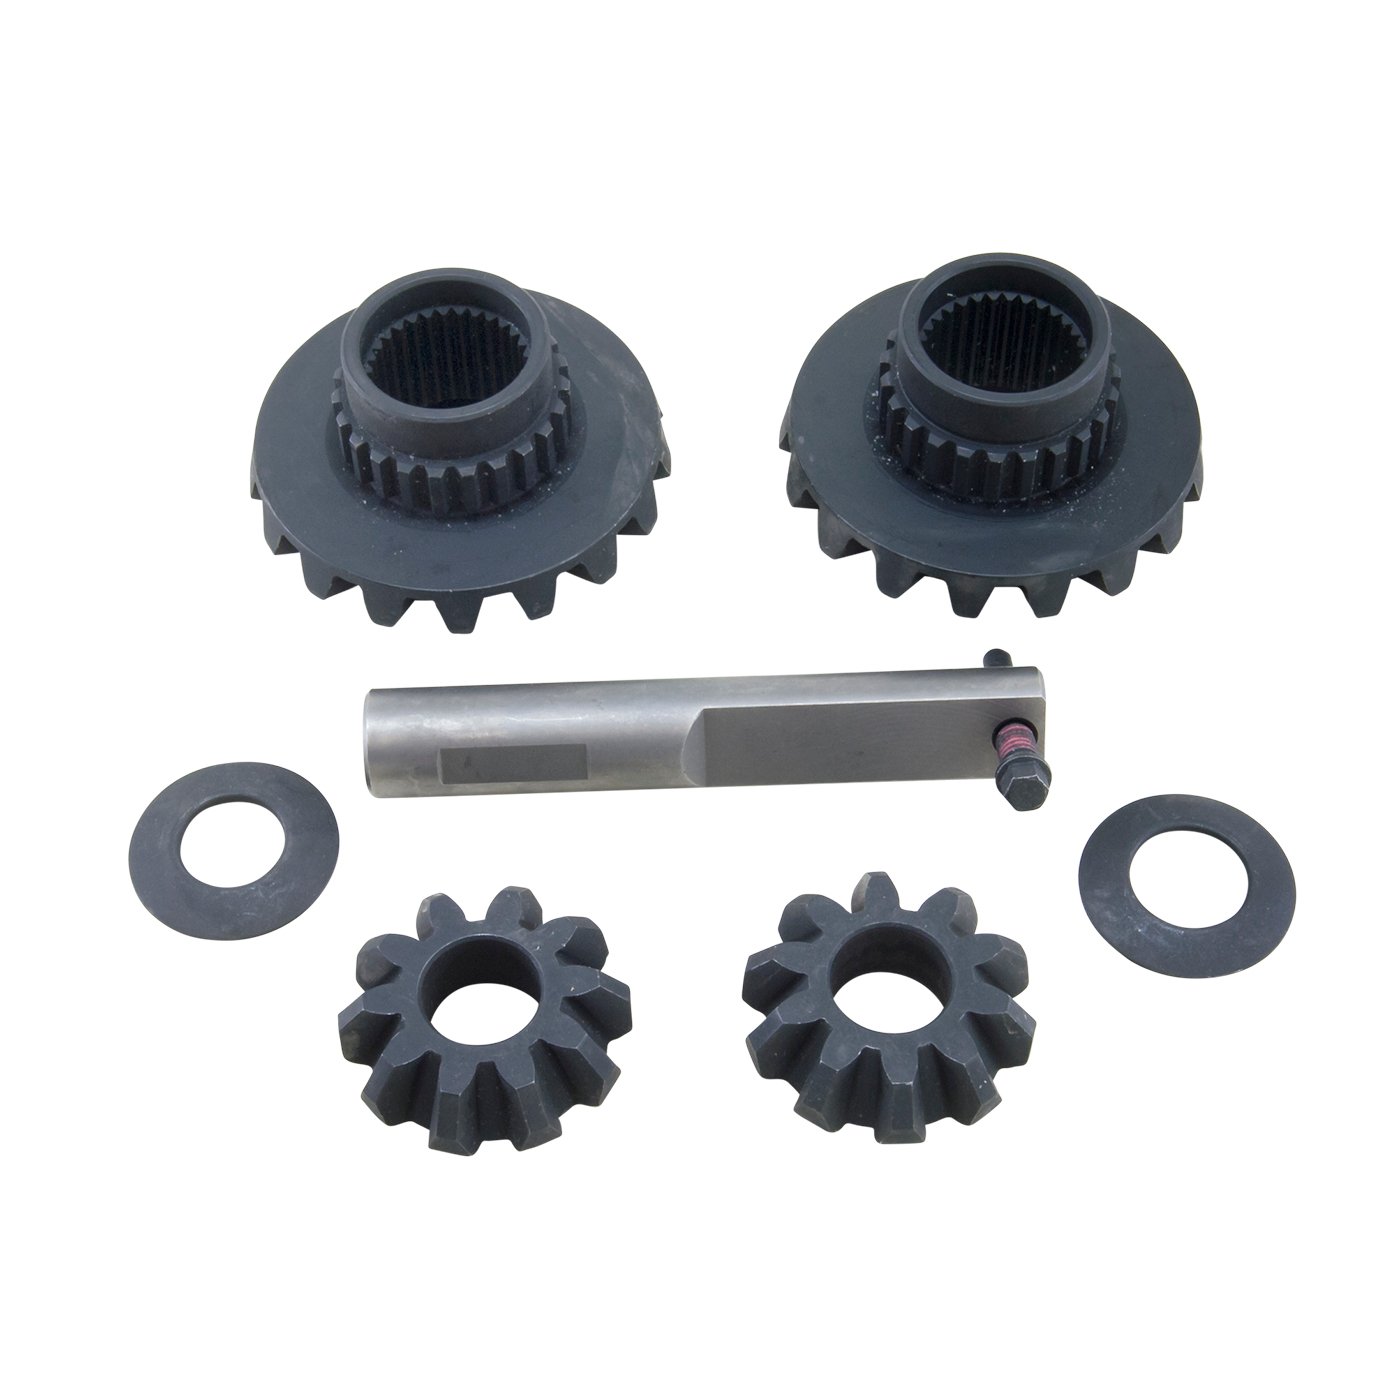 Spider Gear Kit Chrysler 9.25" with Dura Grip Positraction